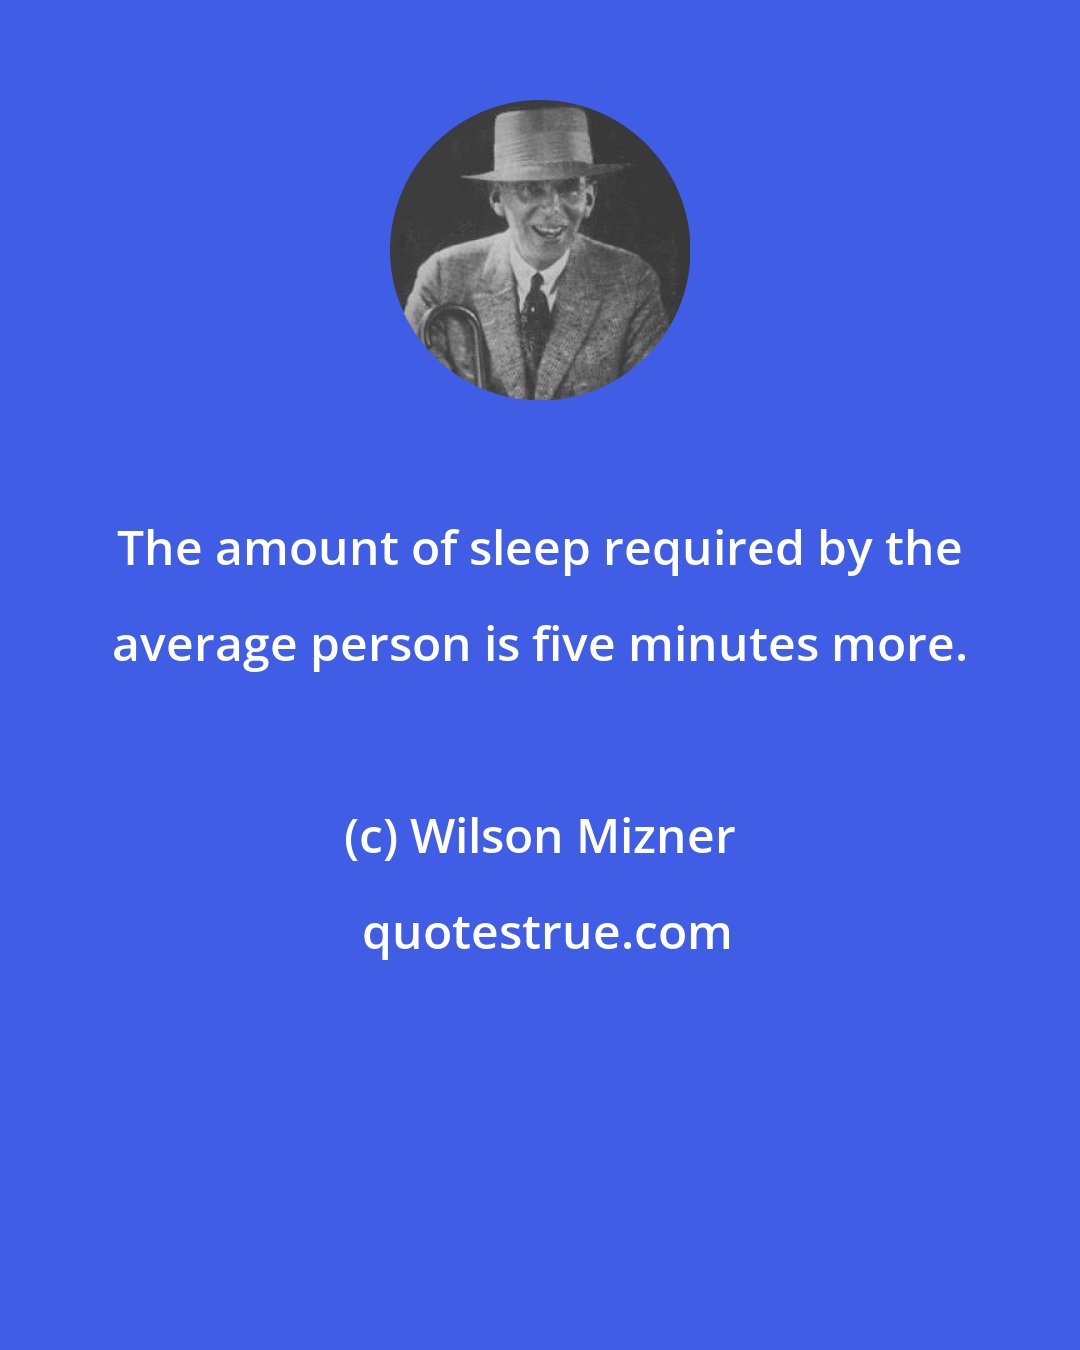 Wilson Mizner: The amount of sleep required by the average person is five minutes more.